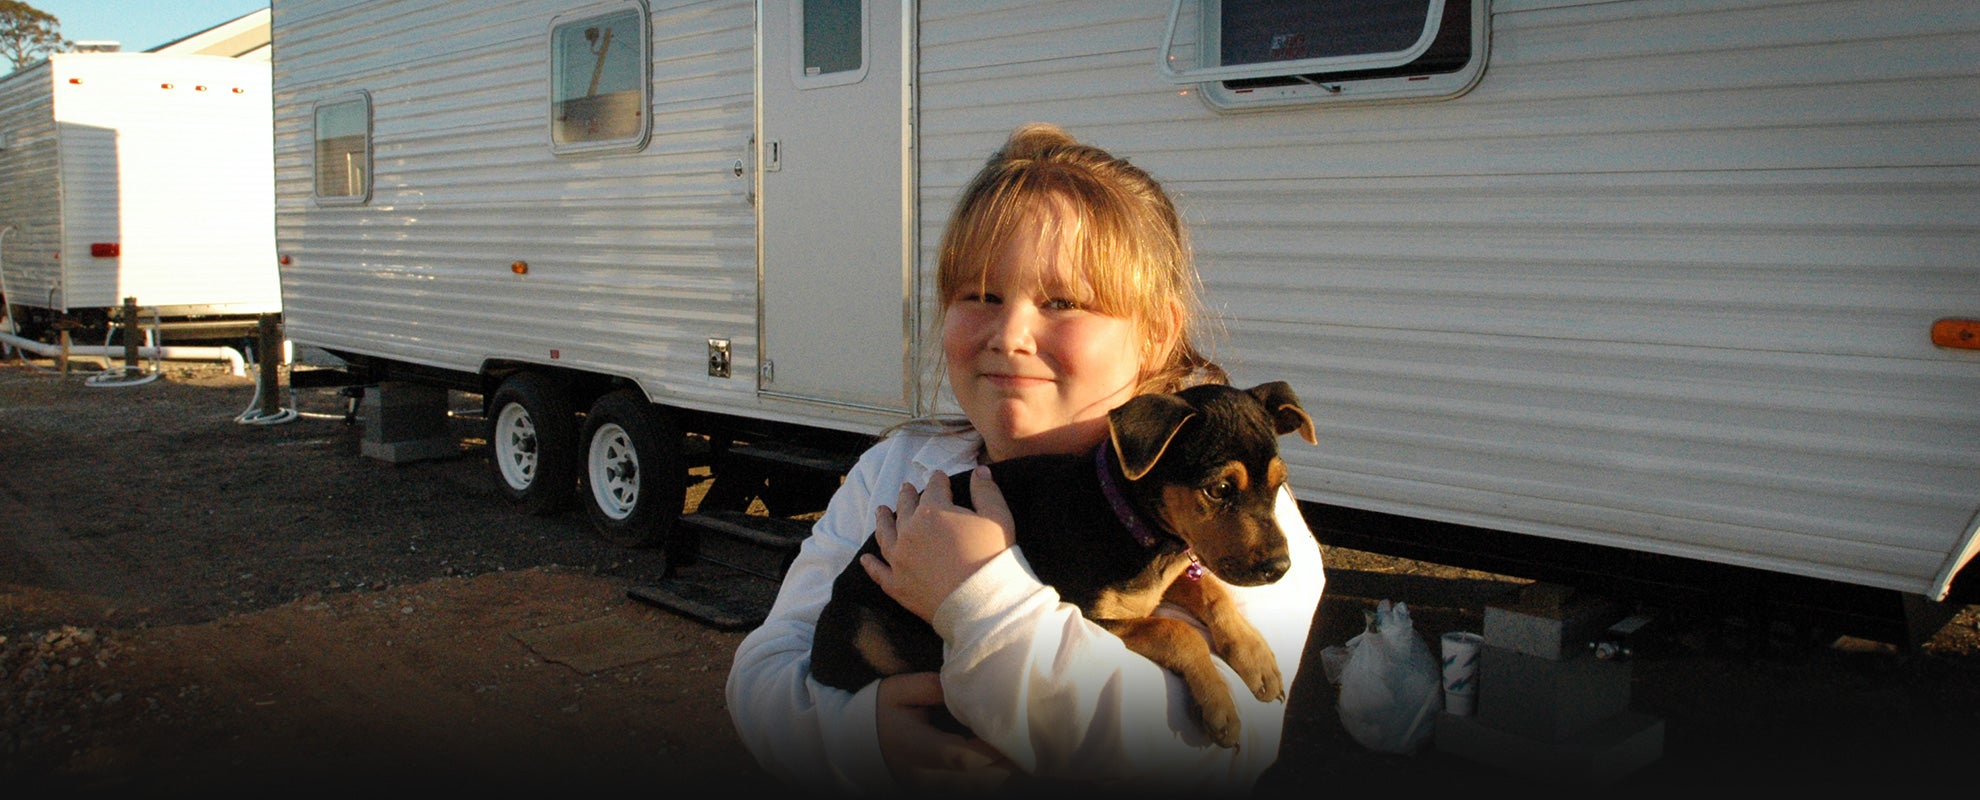 Brianna Edson, a Mississippi resident, and her new dog Dixie in front of the travel trailer serving as their temporary home along with Brianna&#039;s mother Wendy (not pictured) at the Ingalls-Wright Emergency Group Site, in November 2005.